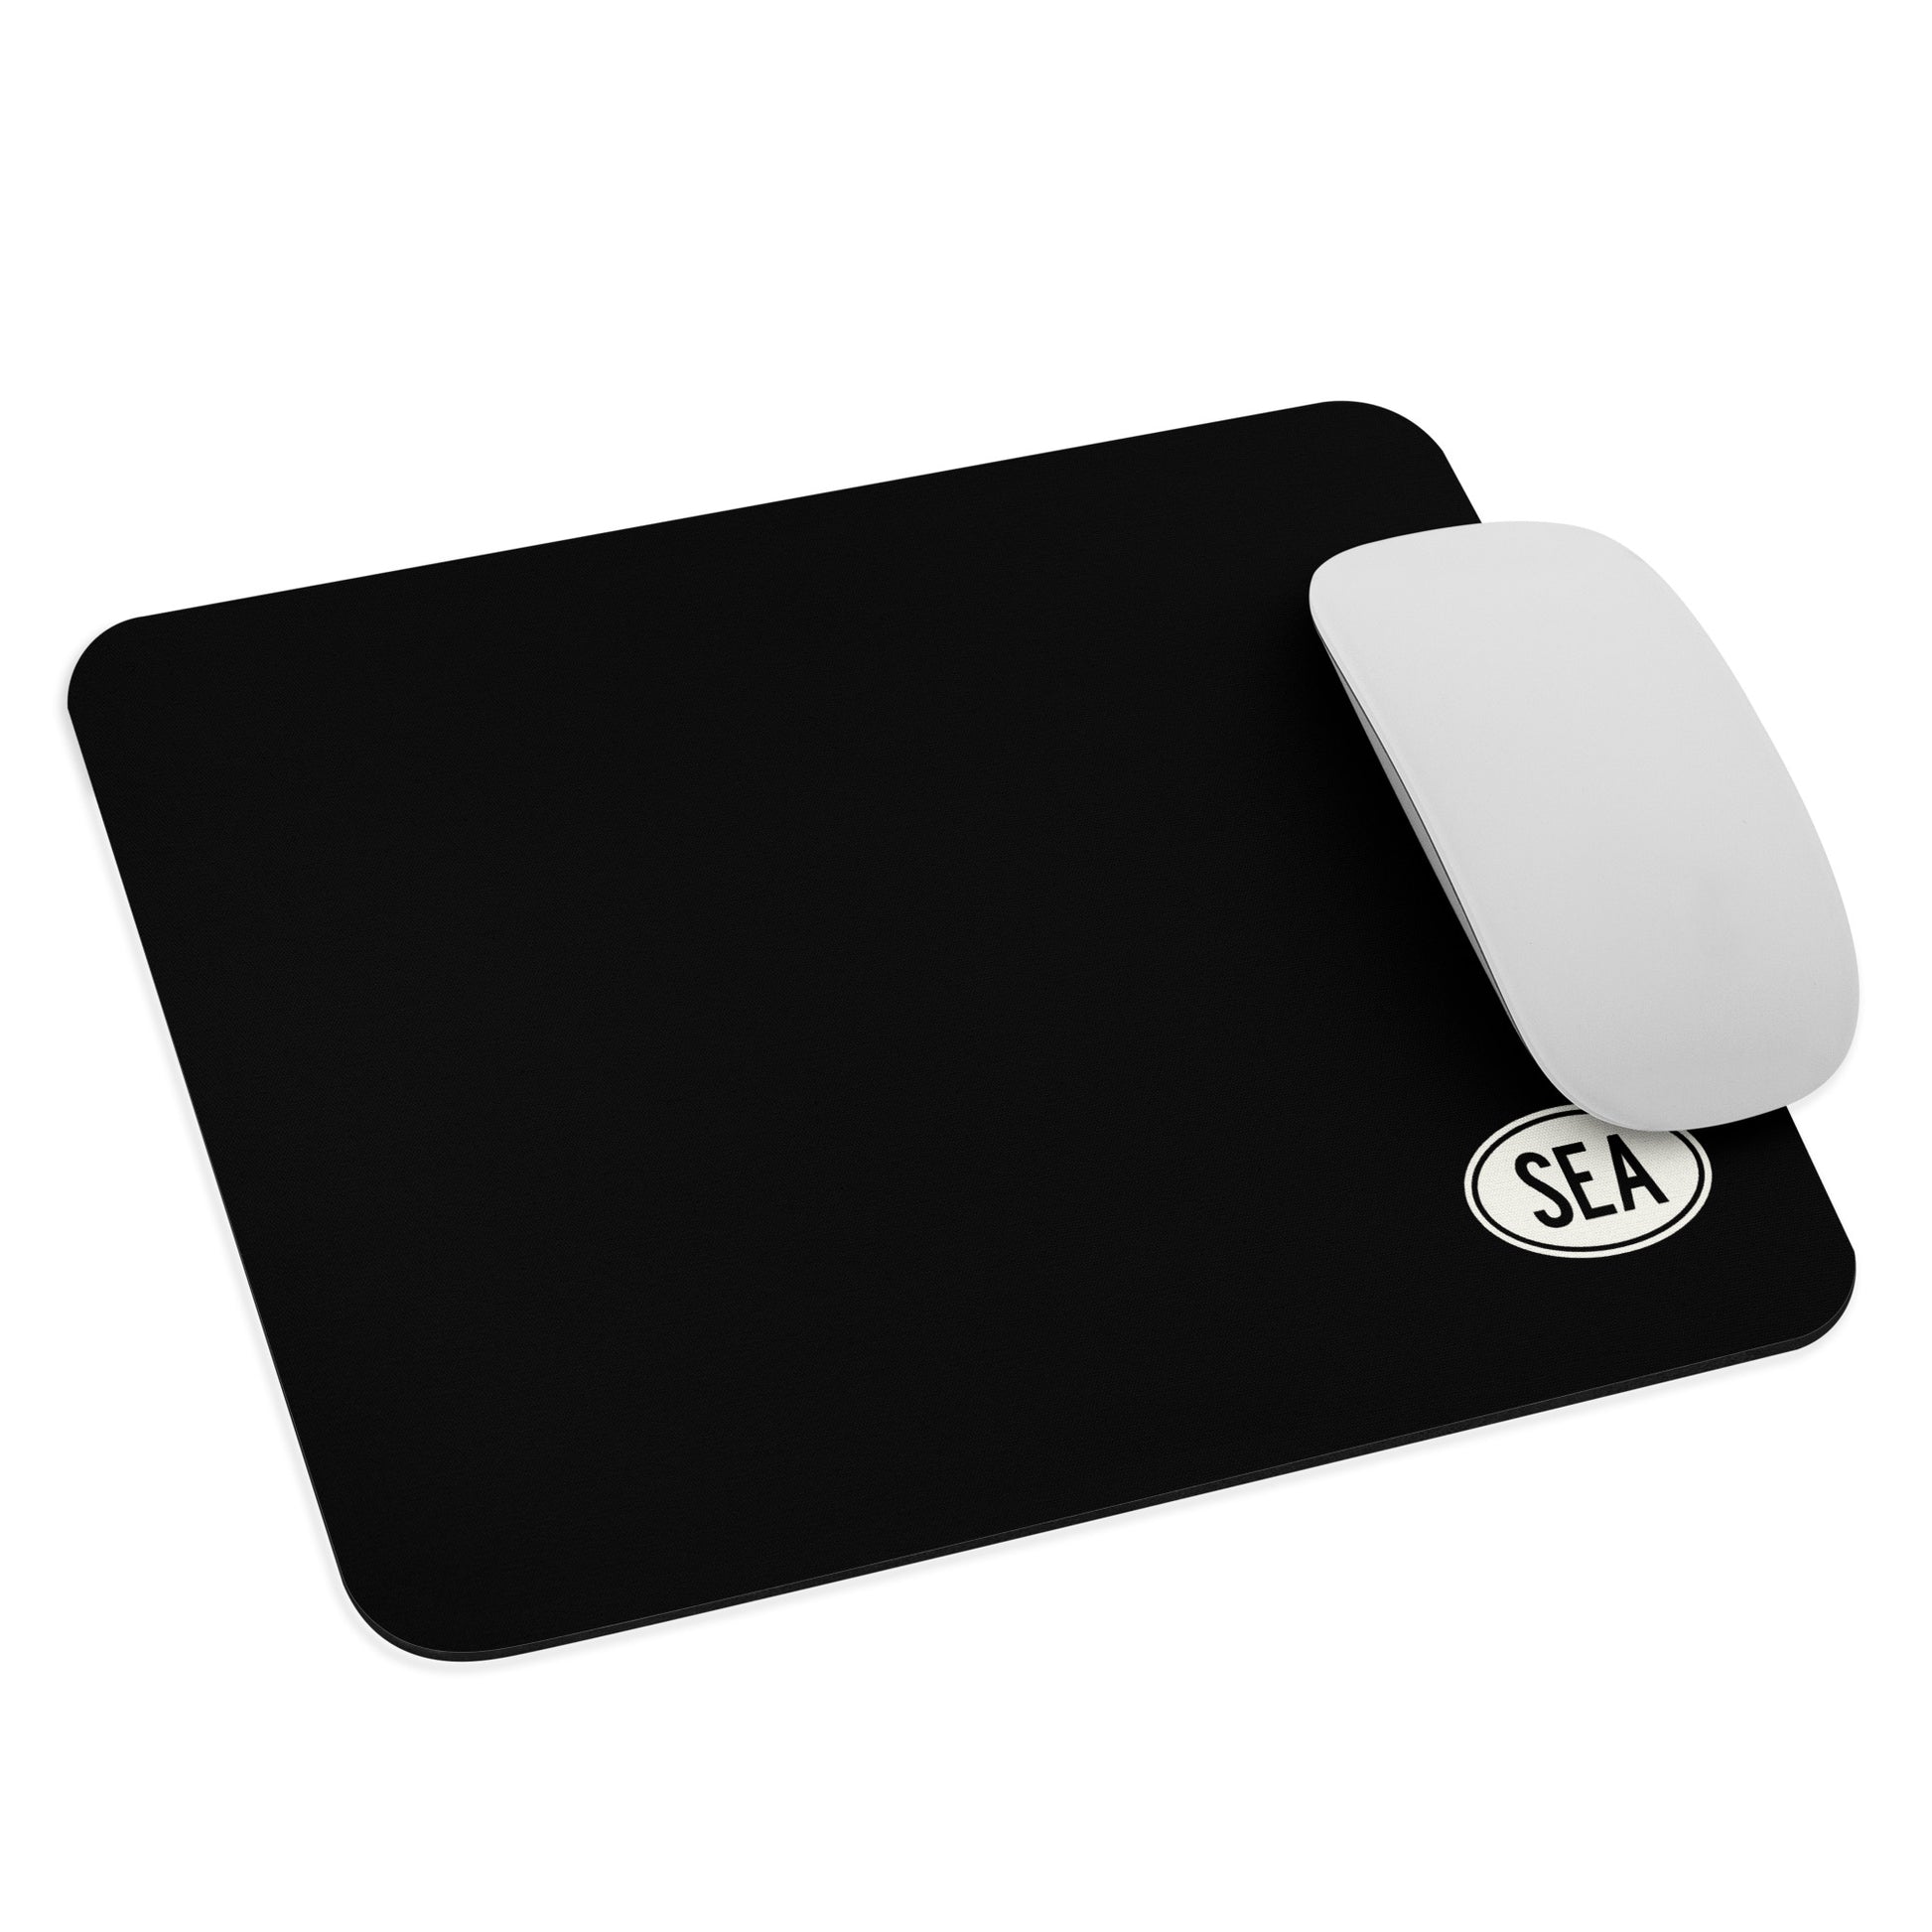 Unique Travel Gift Mouse Pad - White Oval • SEA Seattle • YHM Designs - Image 03